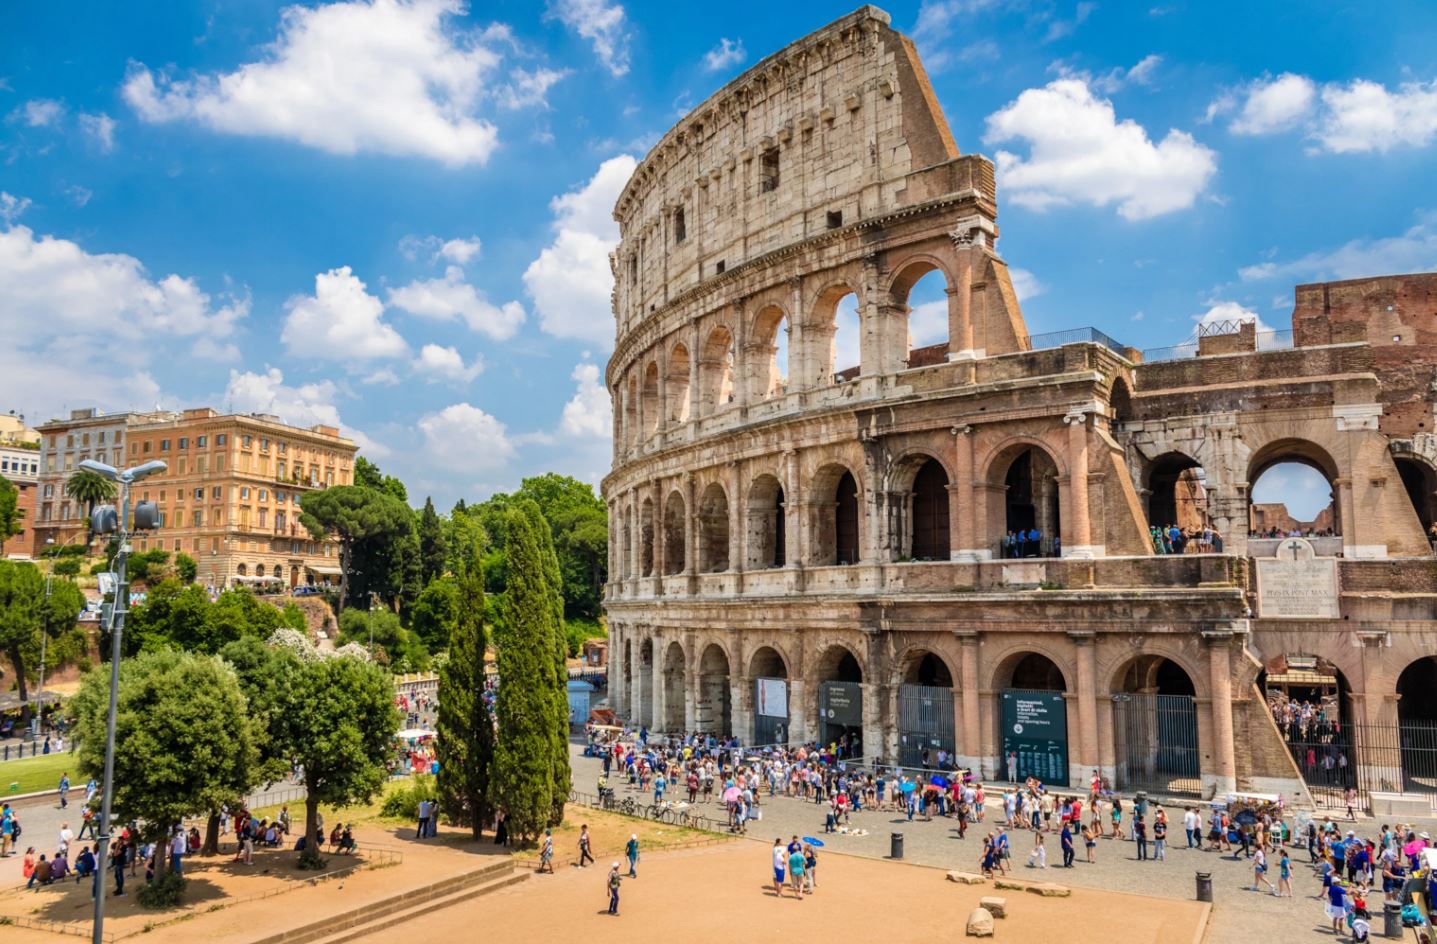 Rome's Colosseum is one of Italy's most famous tourist attractions.